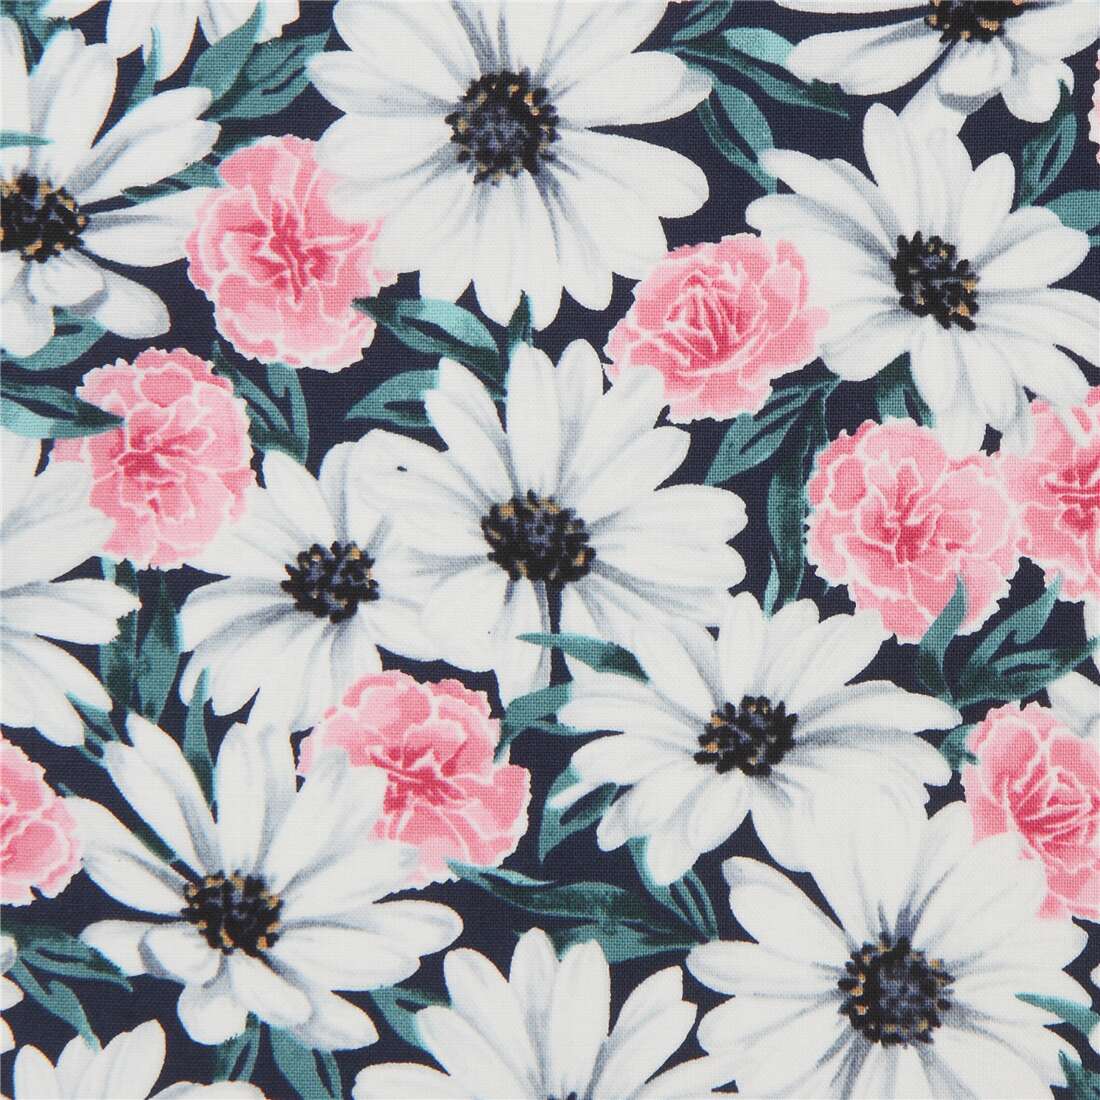 Teal Robert Kaufman Flower Fabric With Daisy And Carnation Pattern Modes4u